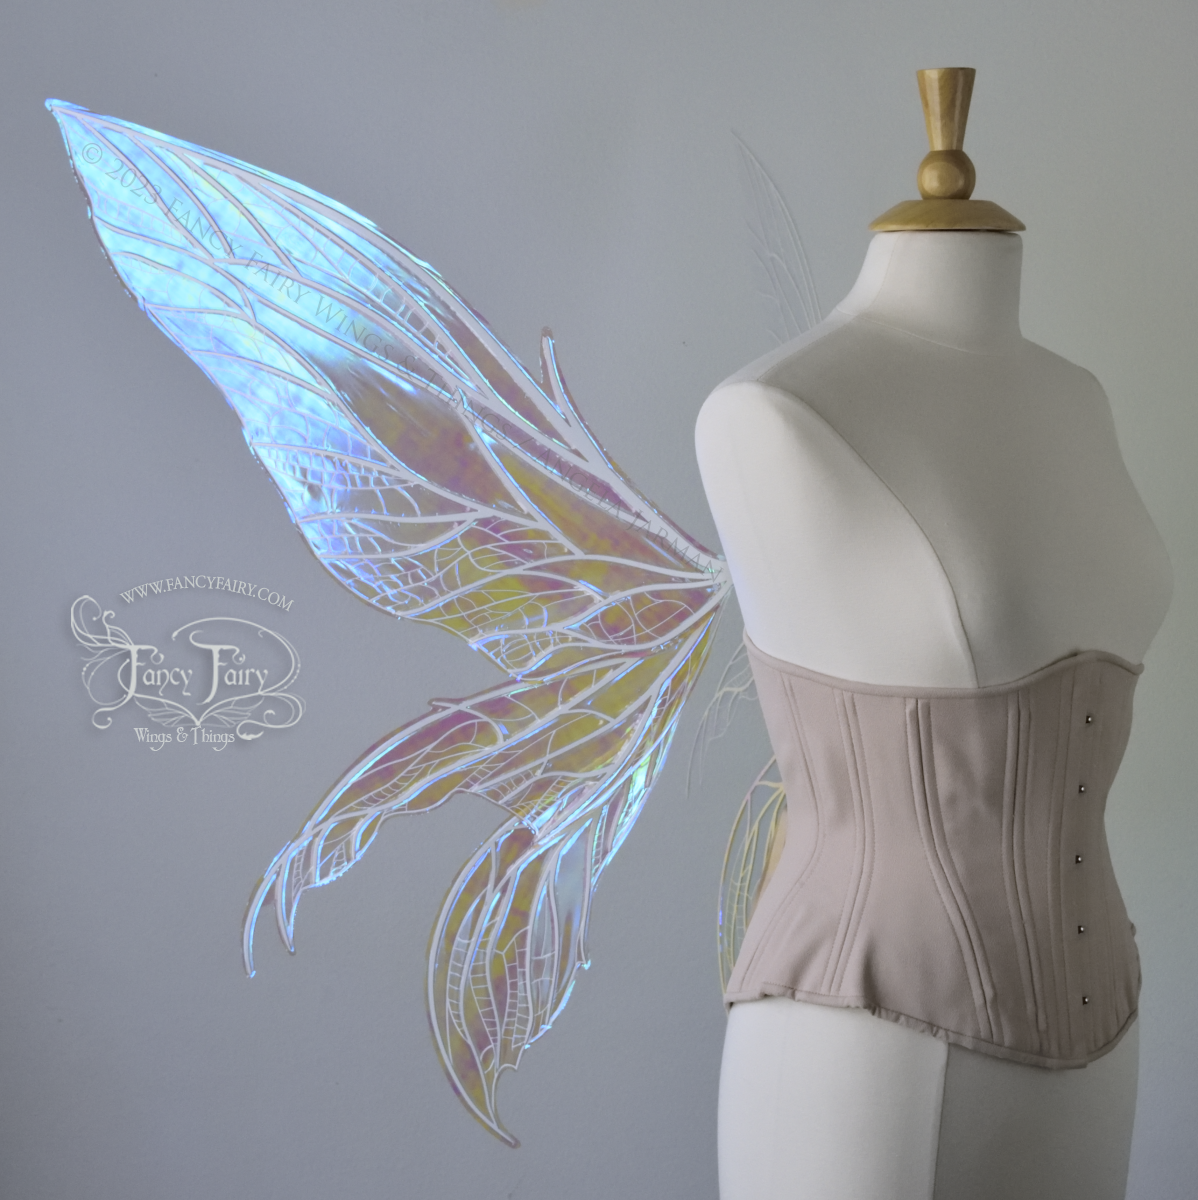 Side Left view of an ivory dress form wearing an underbust corset and large blue/teal/violet iridescent fairy wings. Upper panels are elongated with pointed tips, 2 lower panels curve downward, detailed white veins, standing against a white / grey background